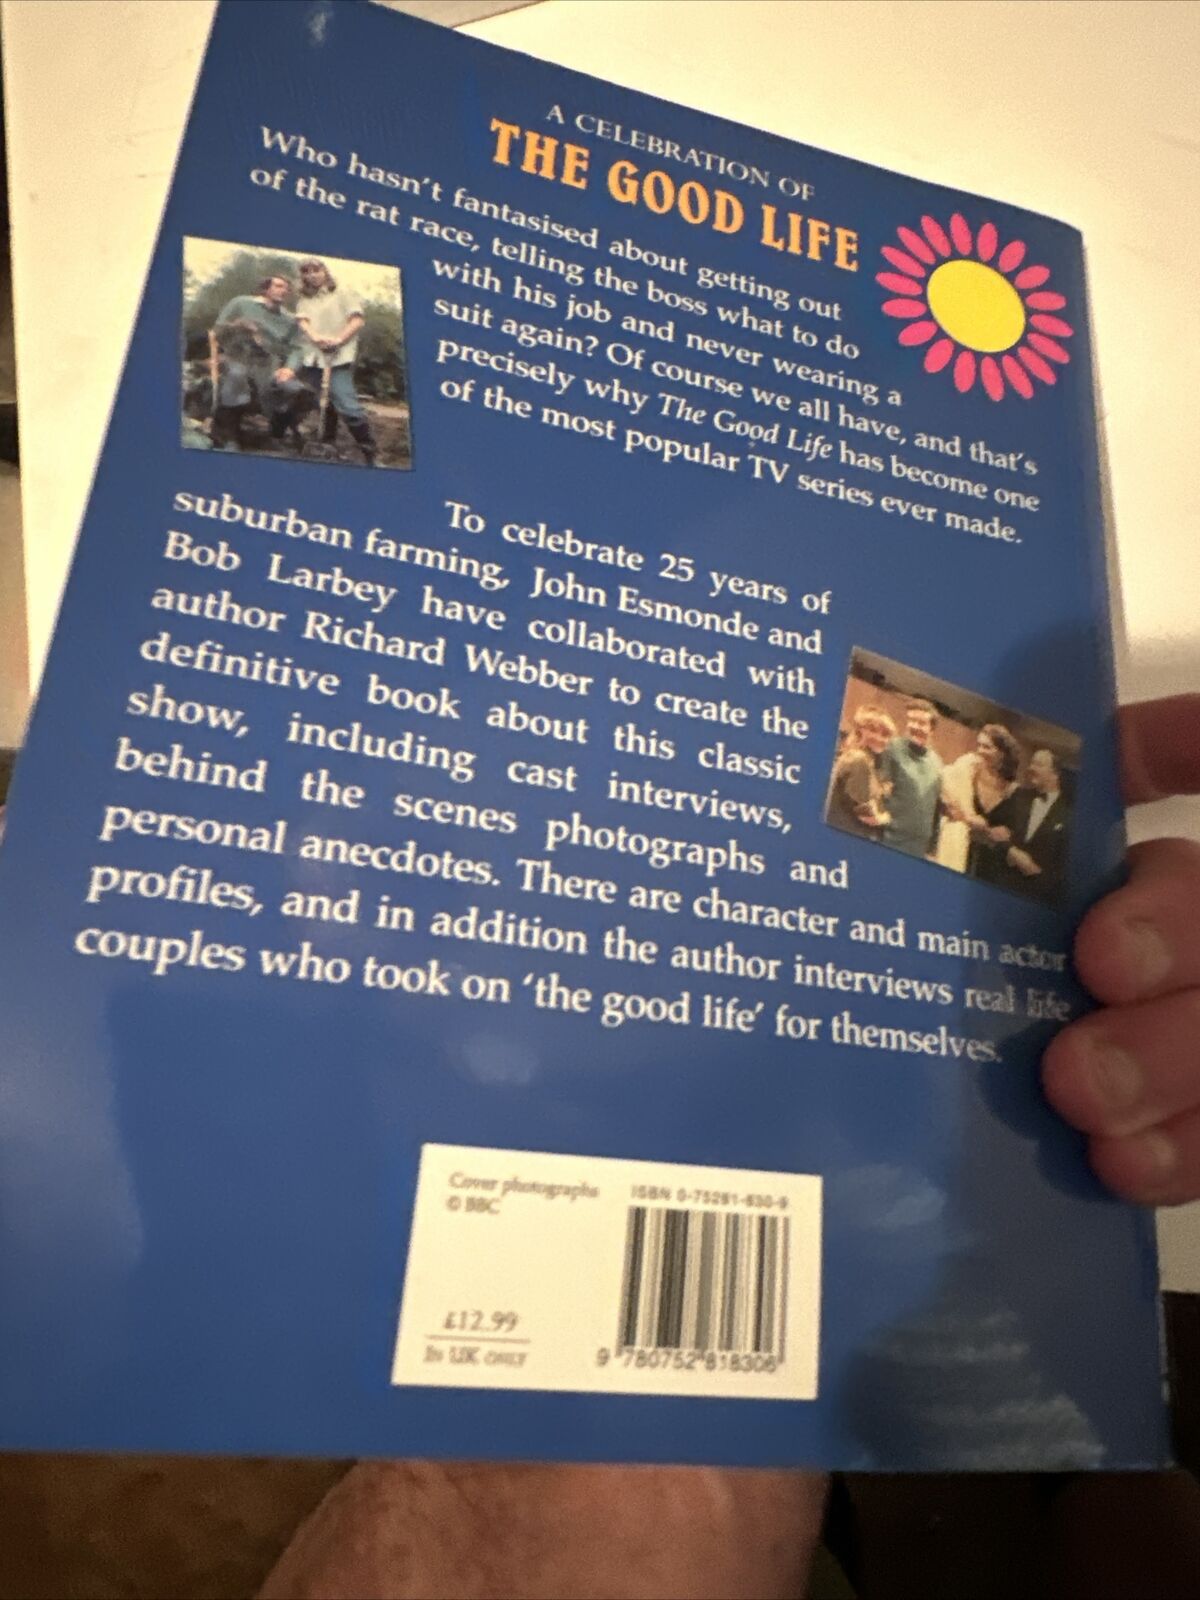 A Celebration of the good life paperback